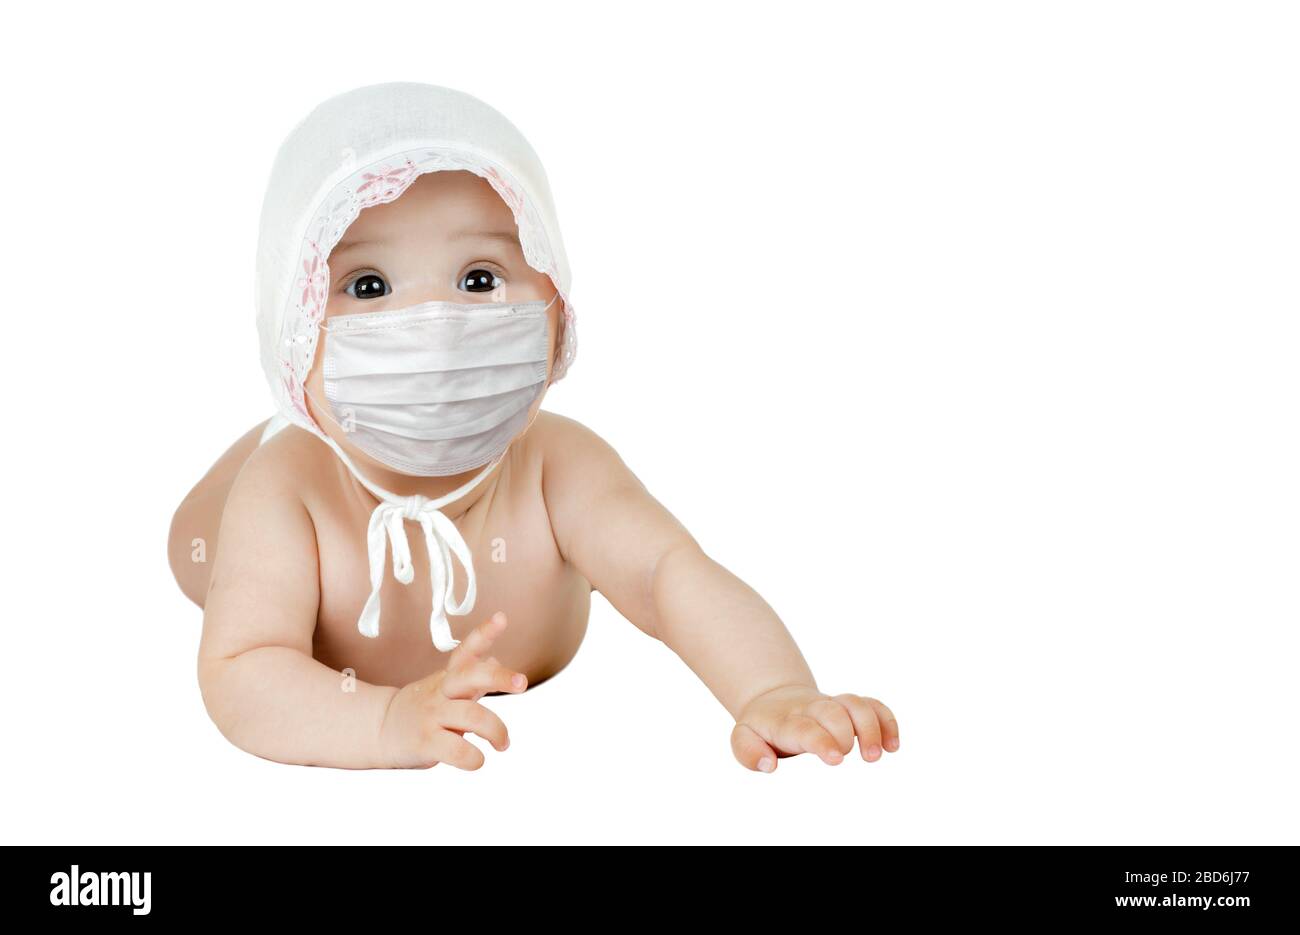 little baby in medical mask, on white background, isolated. Concept covid-19 coronavirus pandemic Stock Photo